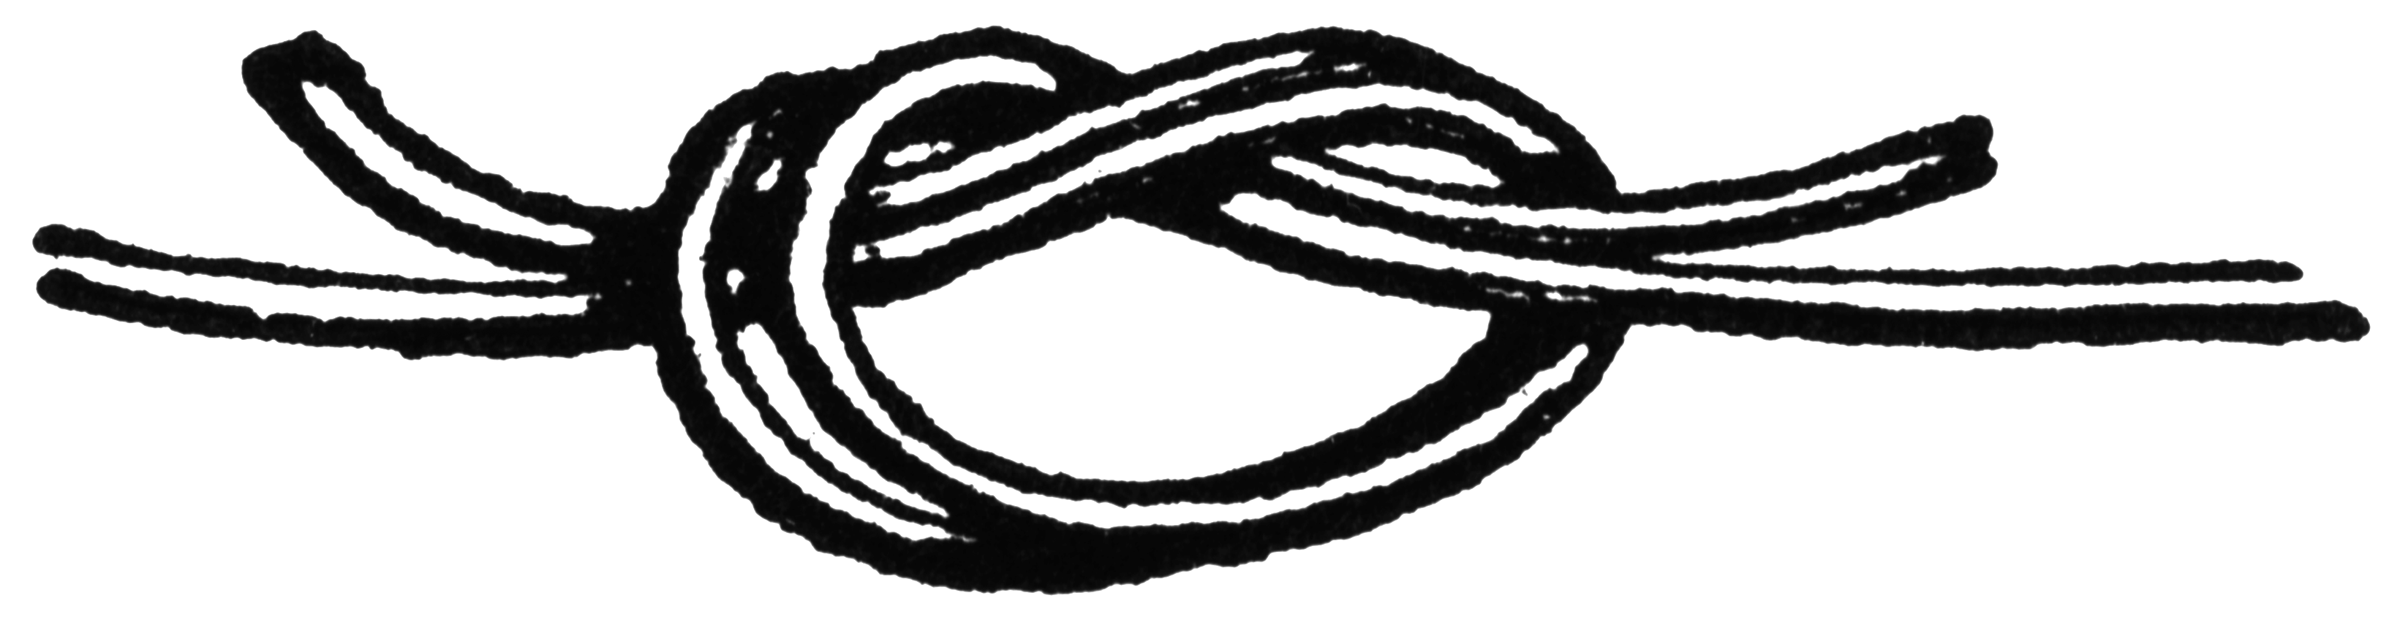 Knots and Splices | ClipArt ETC